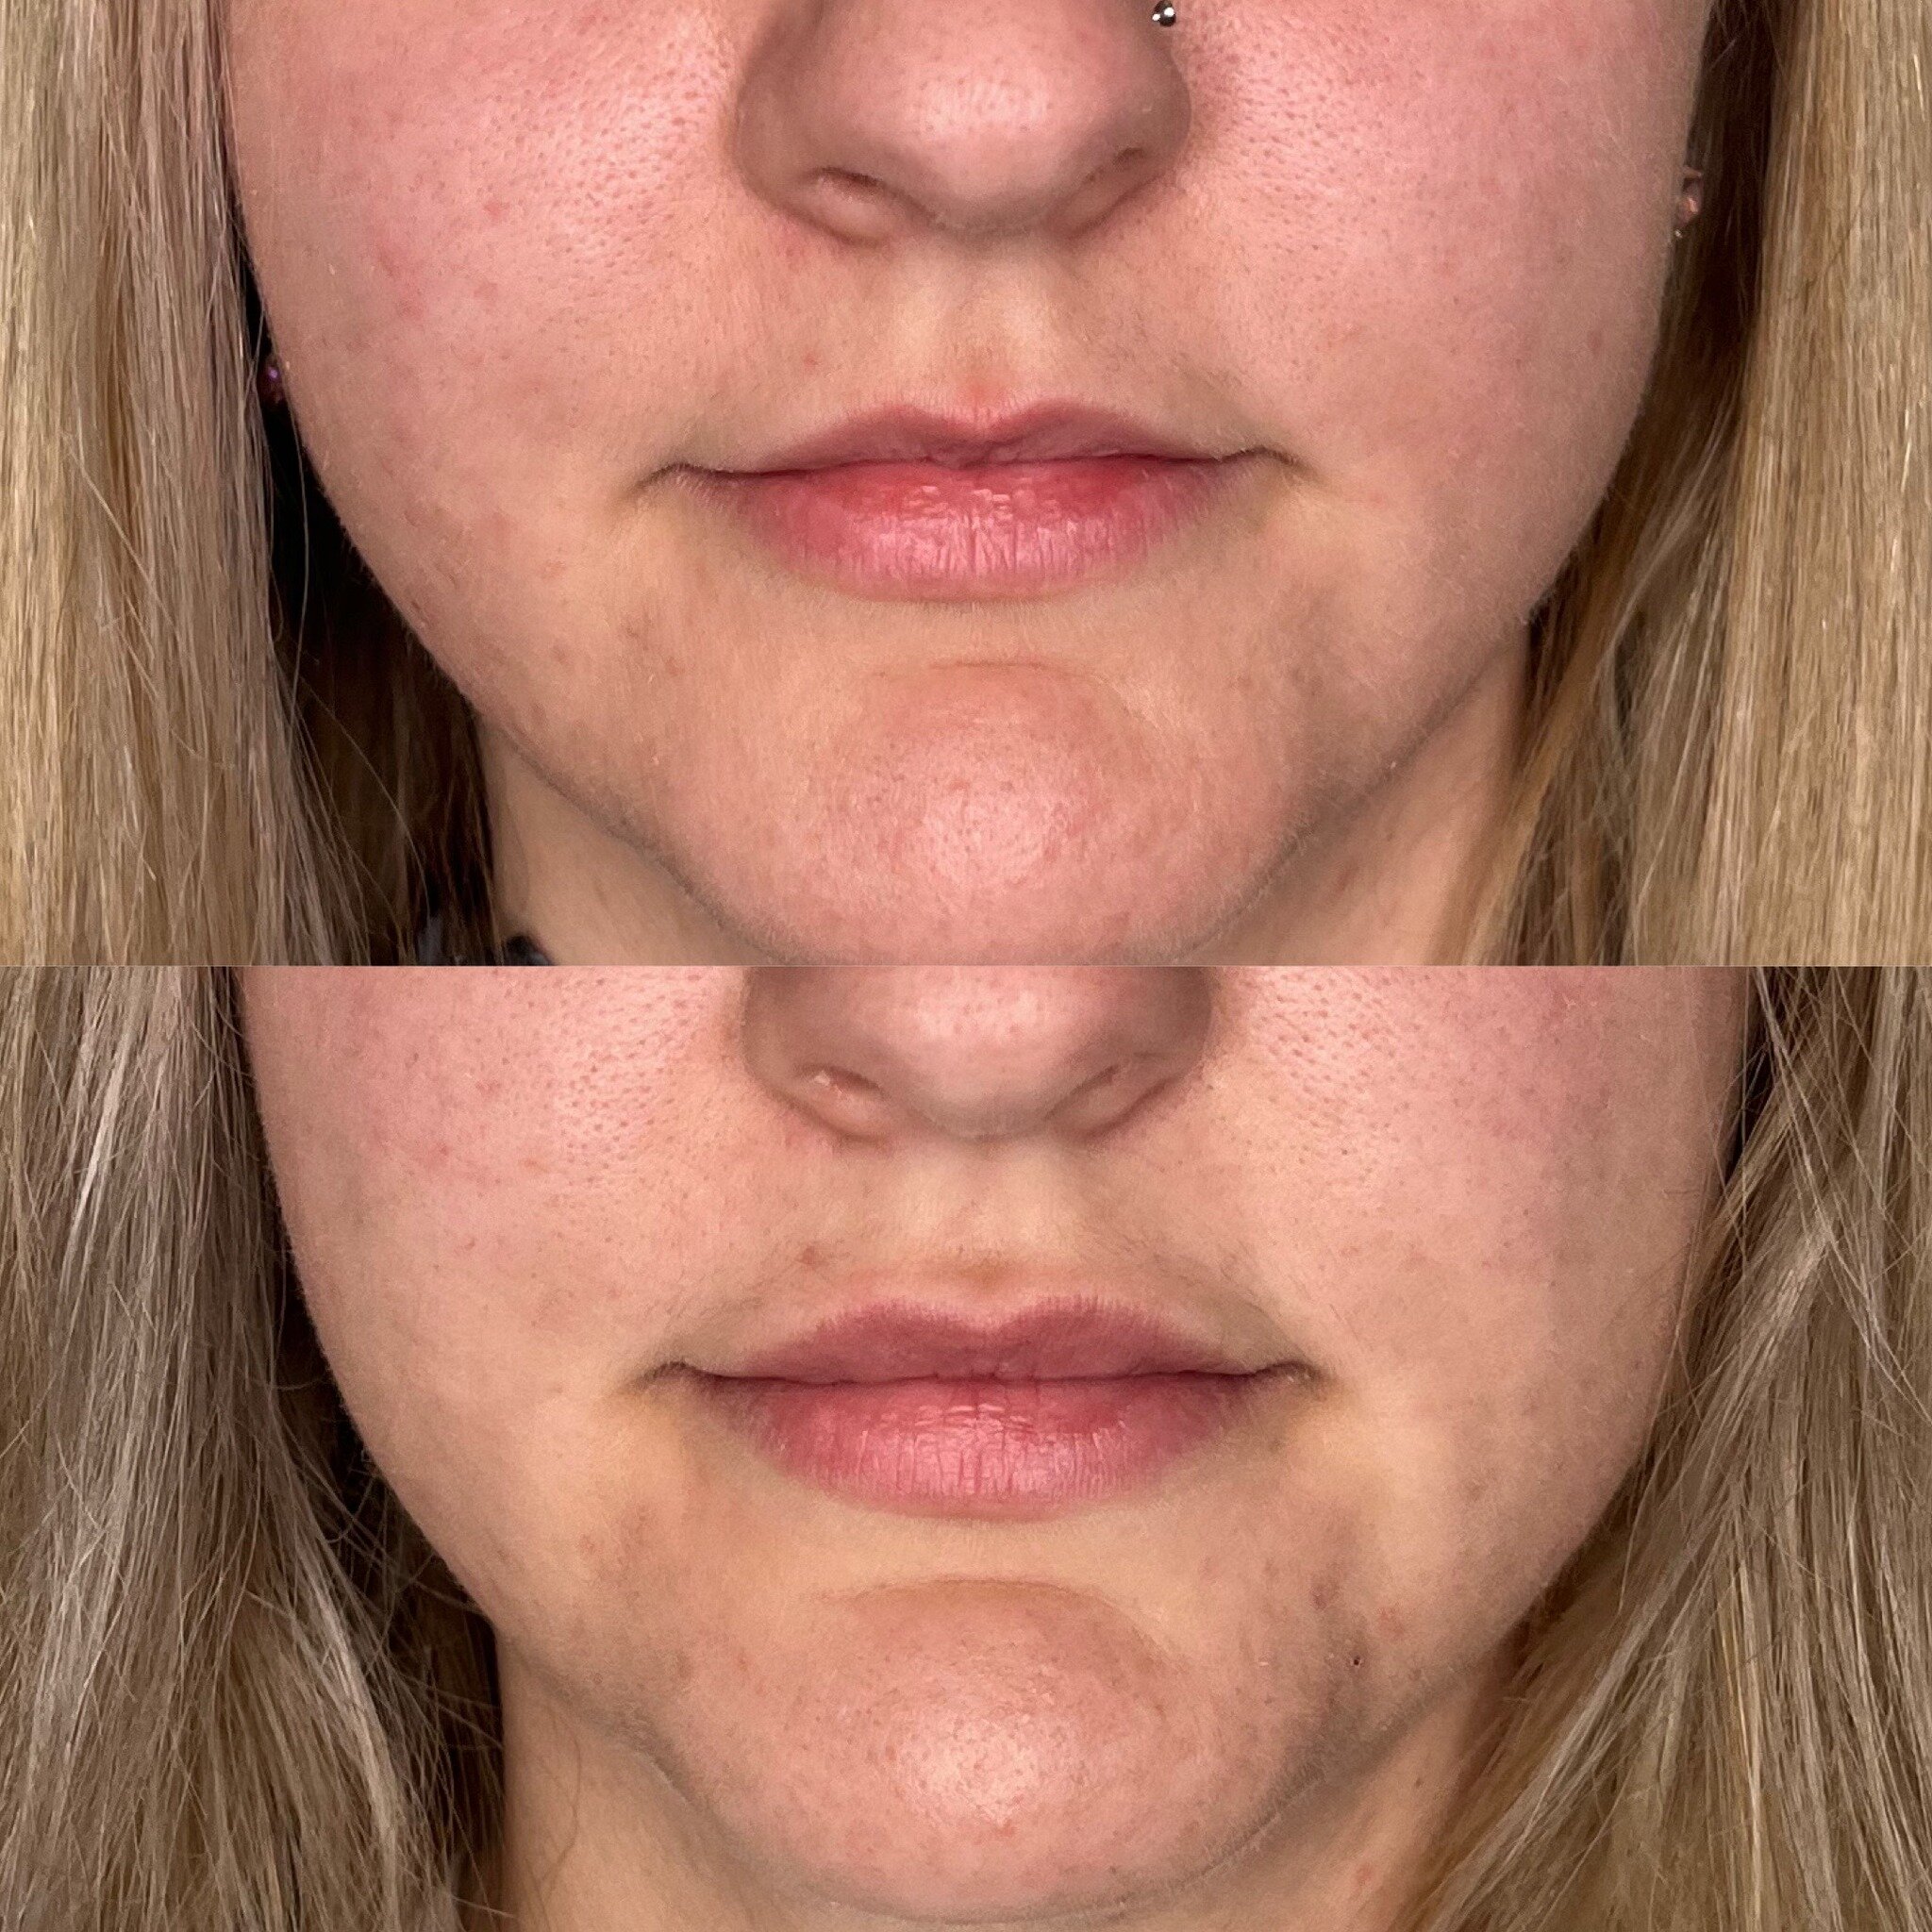 HEALED LIPS! Most of the time, we are posting lips fresh off the needle, so here is a beautiful soft lip enhancement healed at the 6 week mark! She came in to us wanting more balance, and to &quot;lift her upper lip more&quot;. 

Notice her upper lip